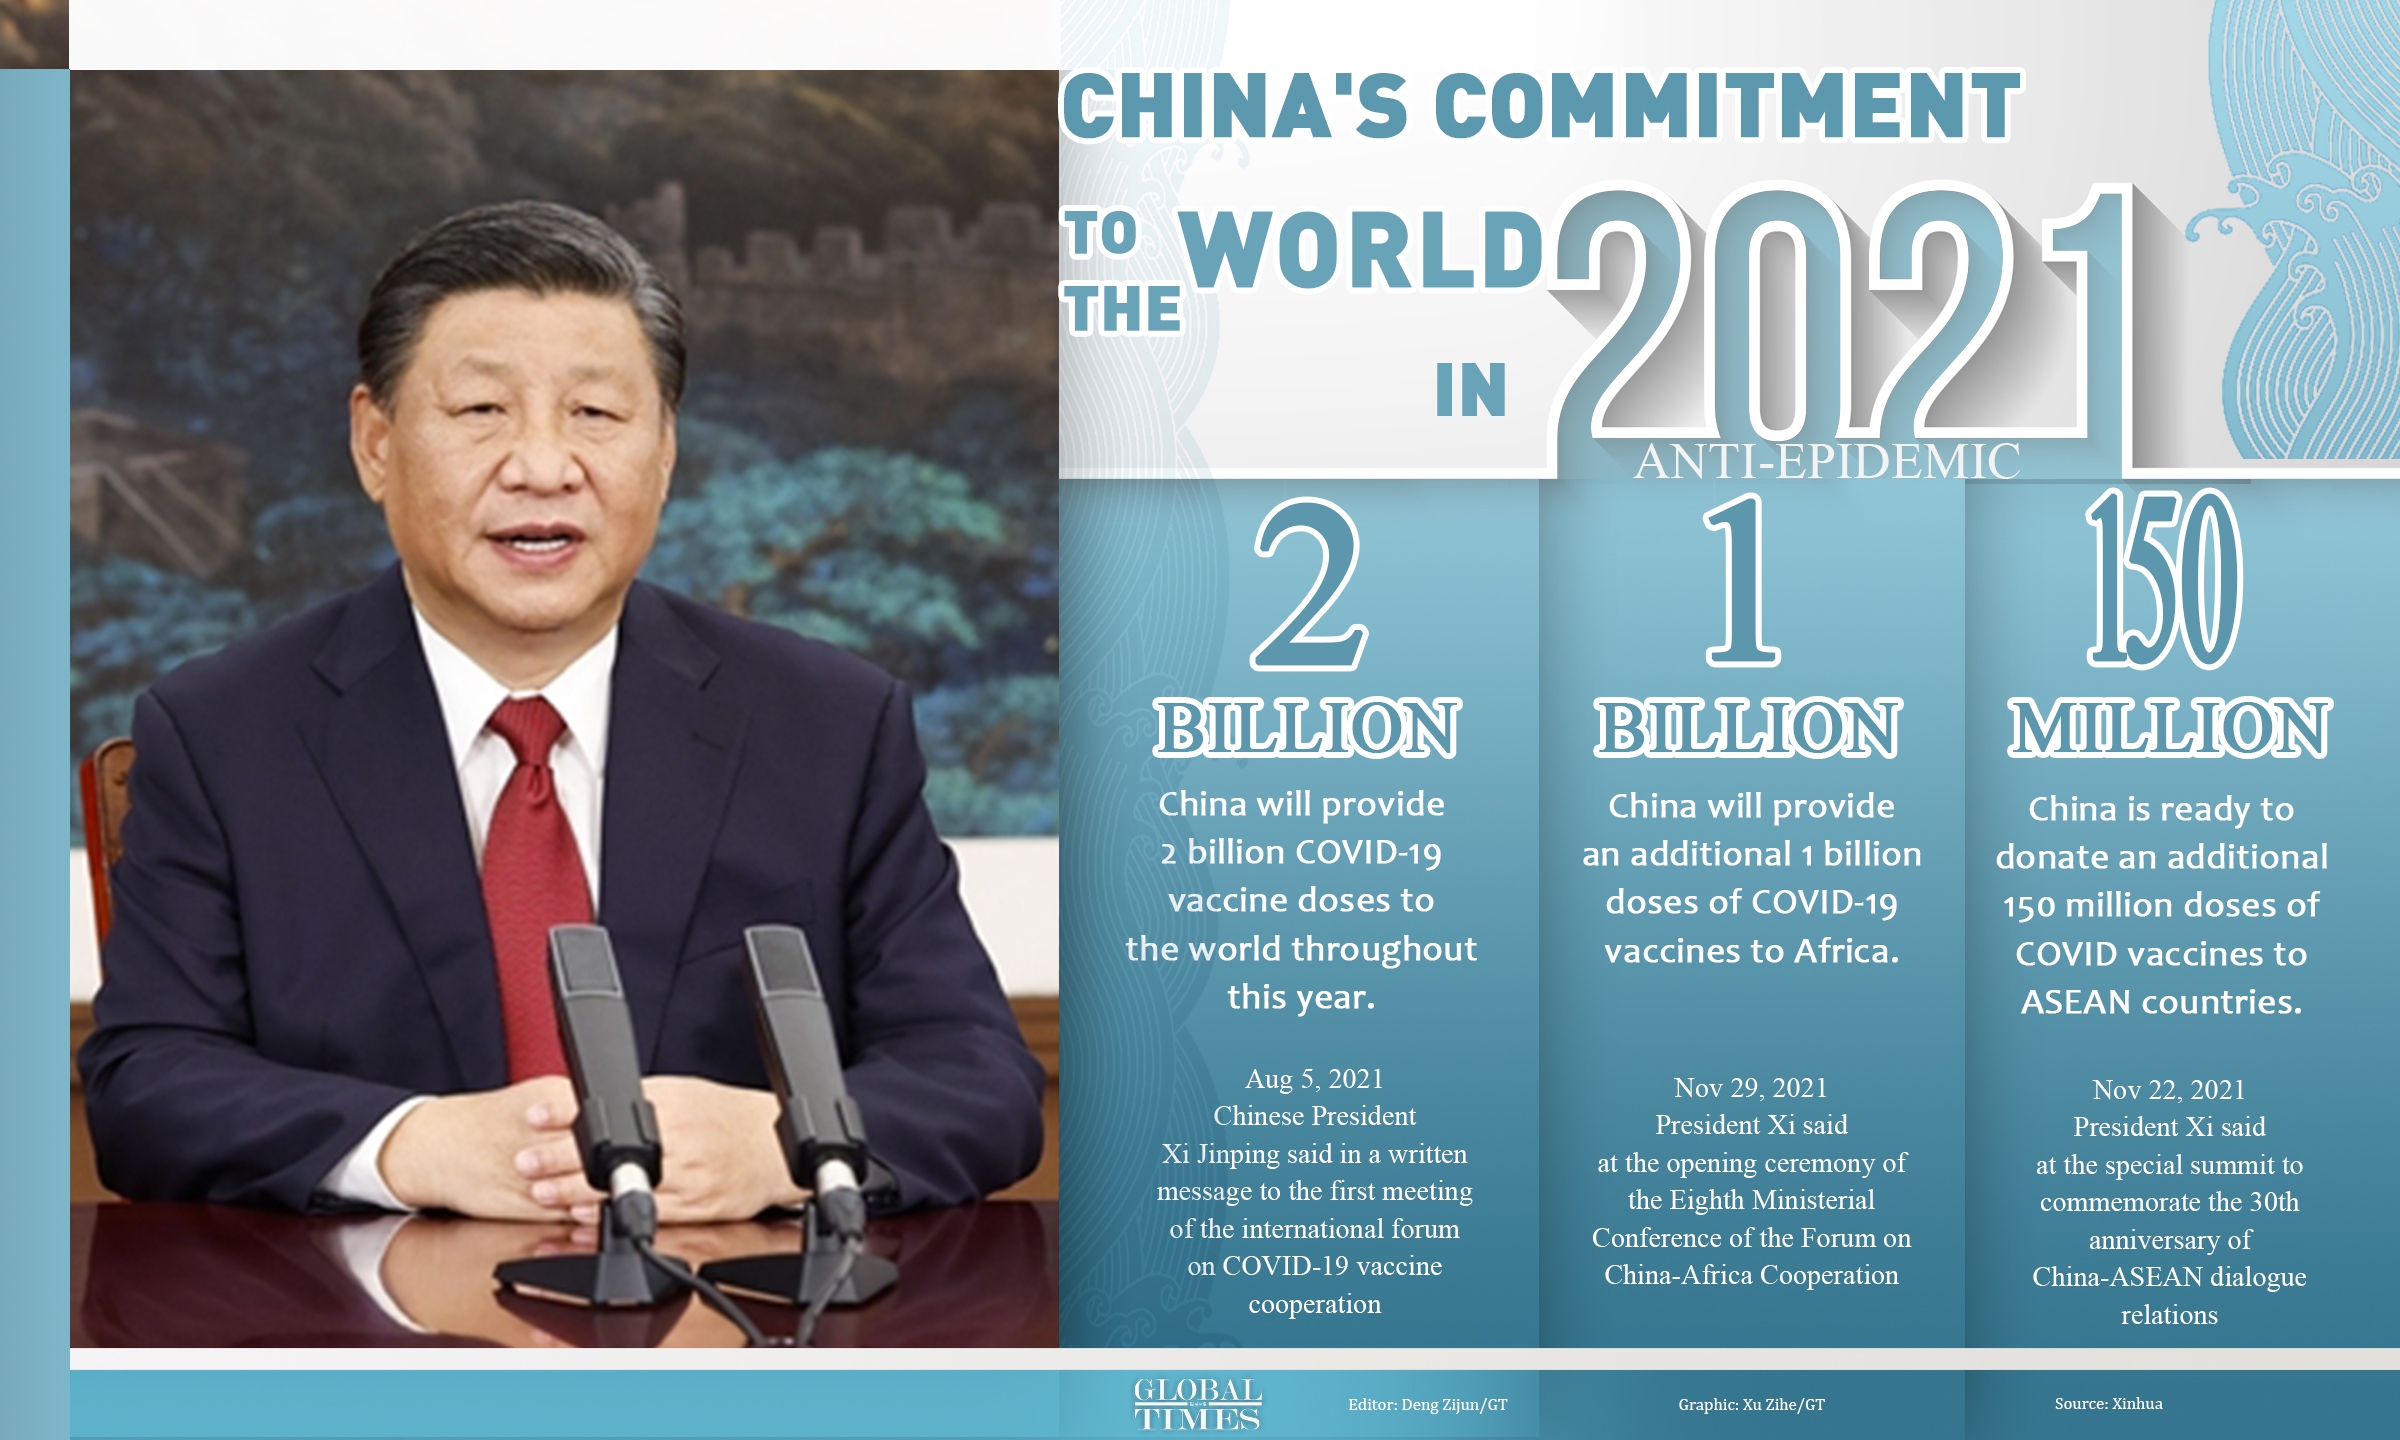 China's commitment to the world in 2021.Graphic:Xu Zihe/GT